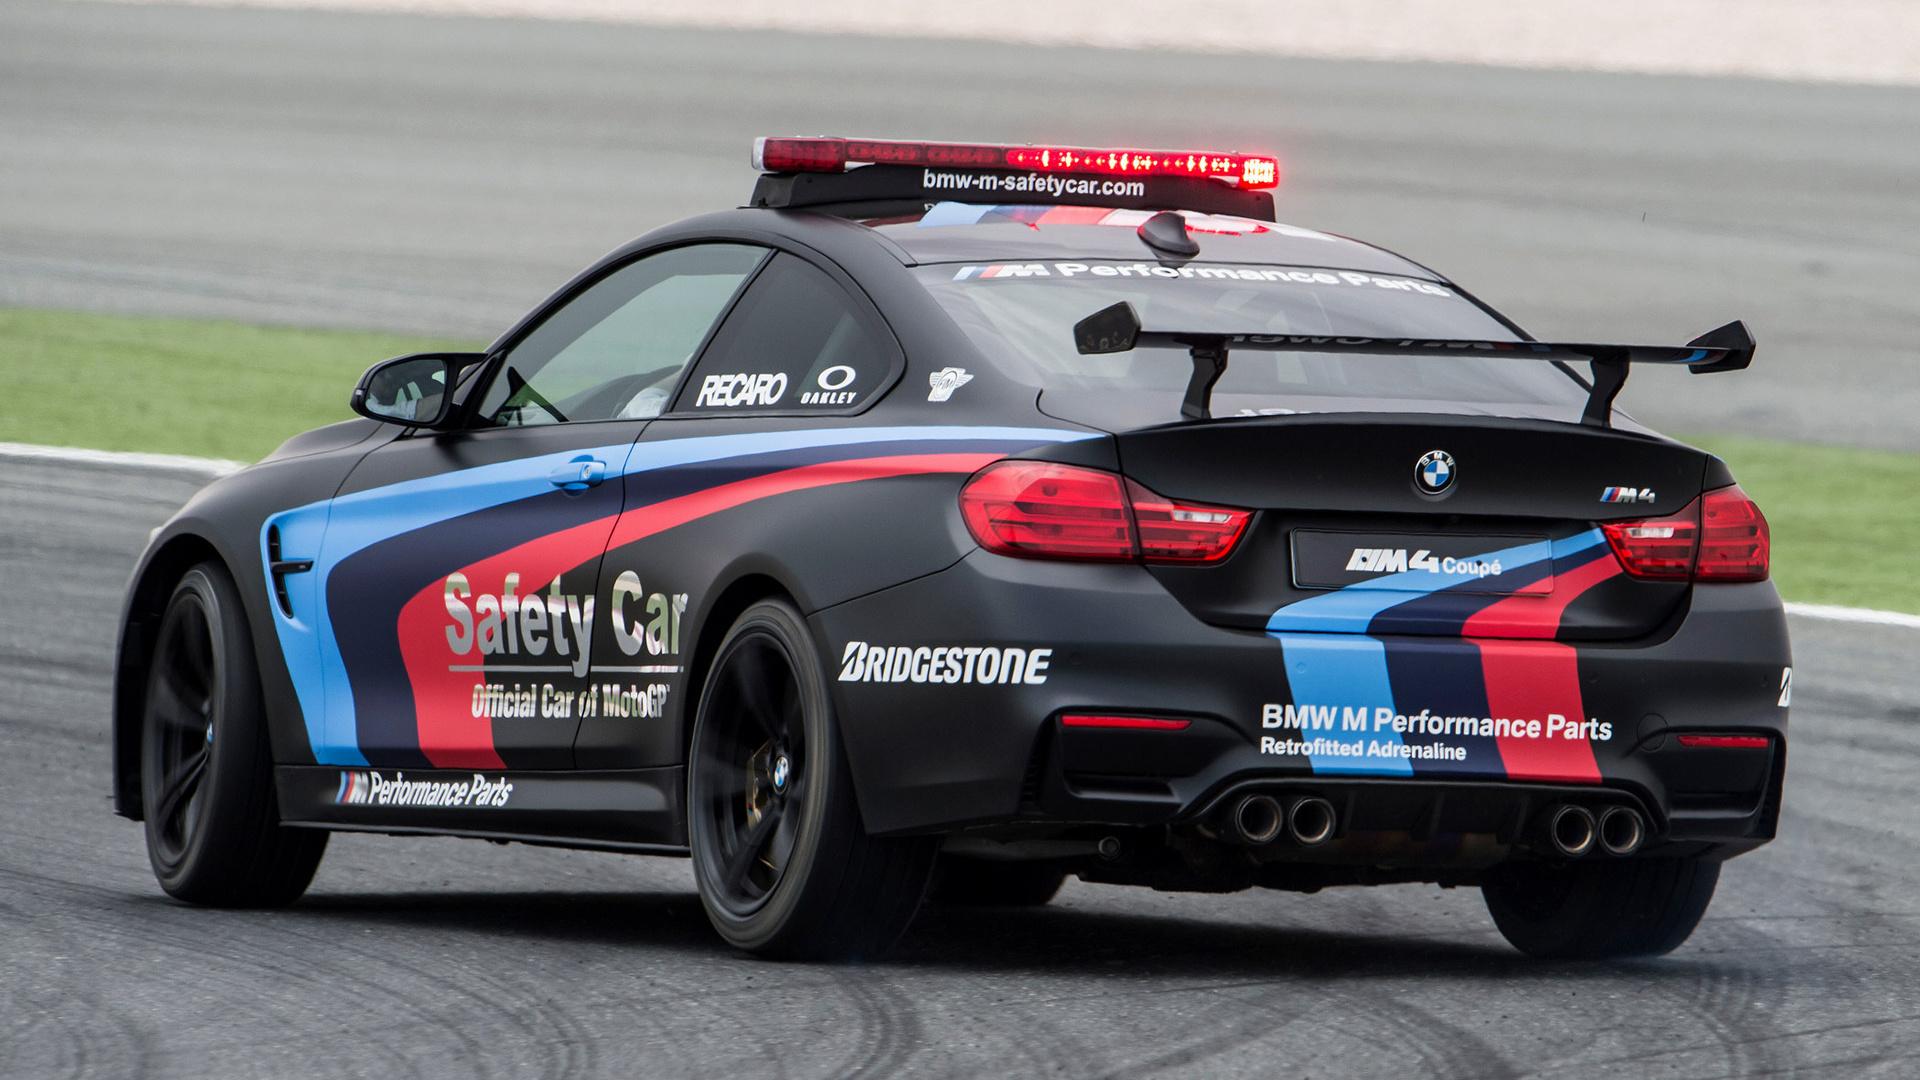 All in One Wallpaper: 2015 Bmw M4 Motogp Safety Car Wallpaper HD